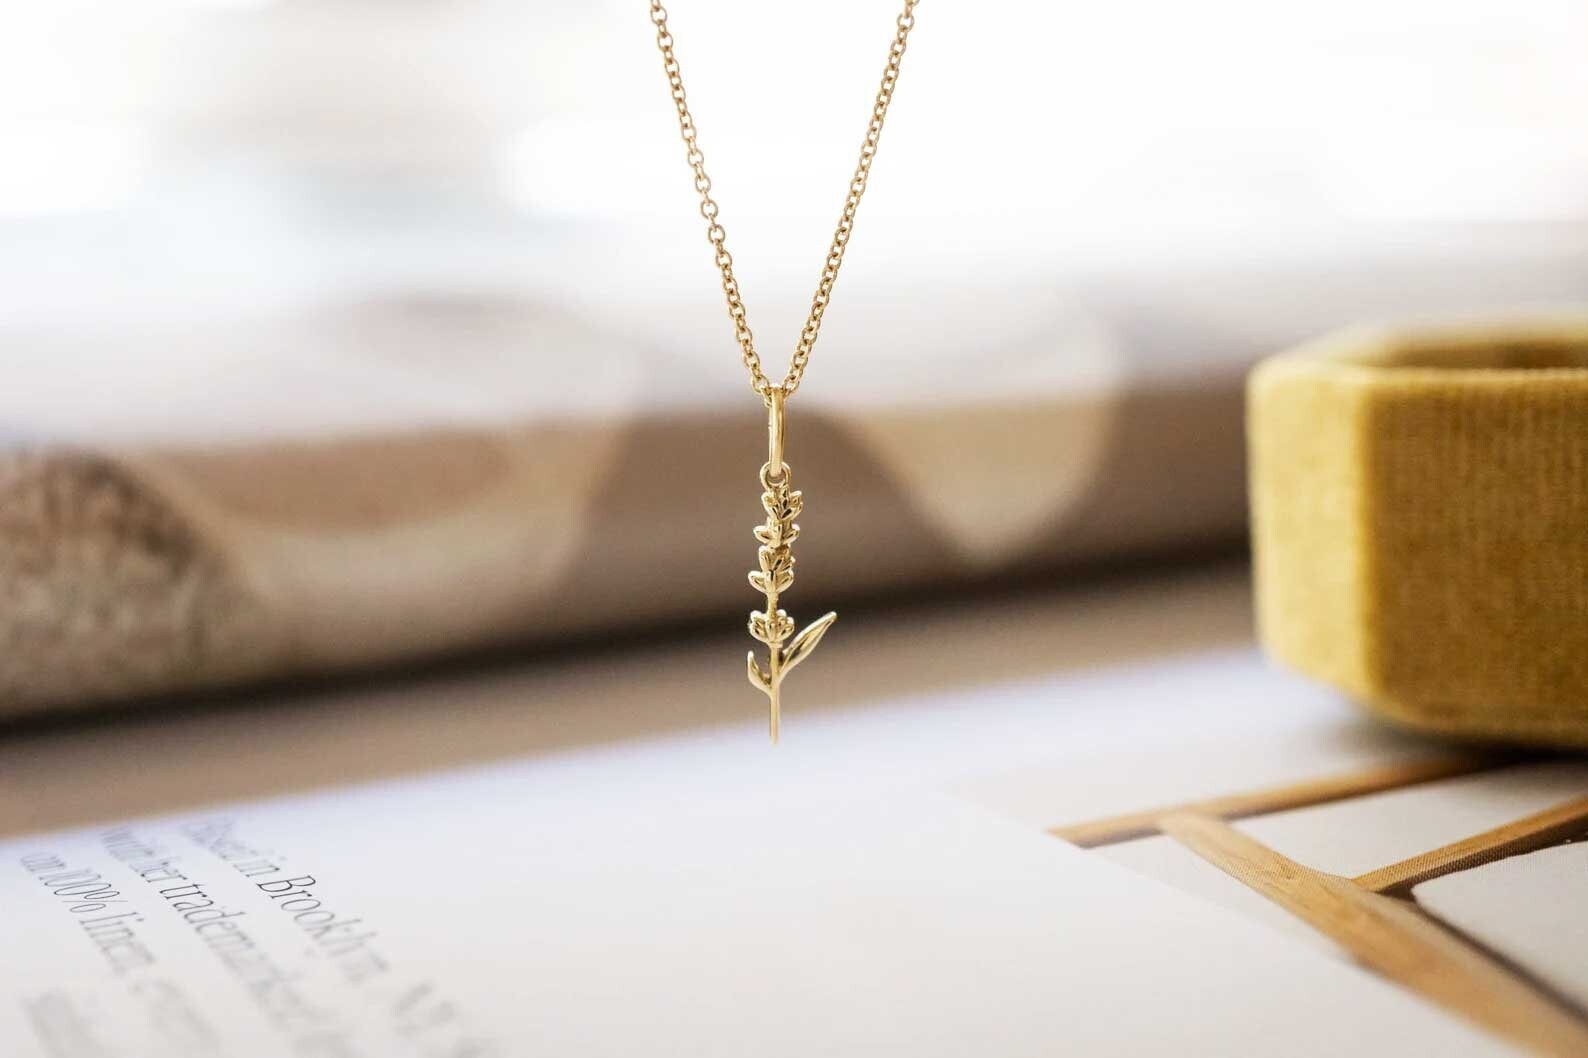 Devotion Rose Necklace in 14k Yellow Gold